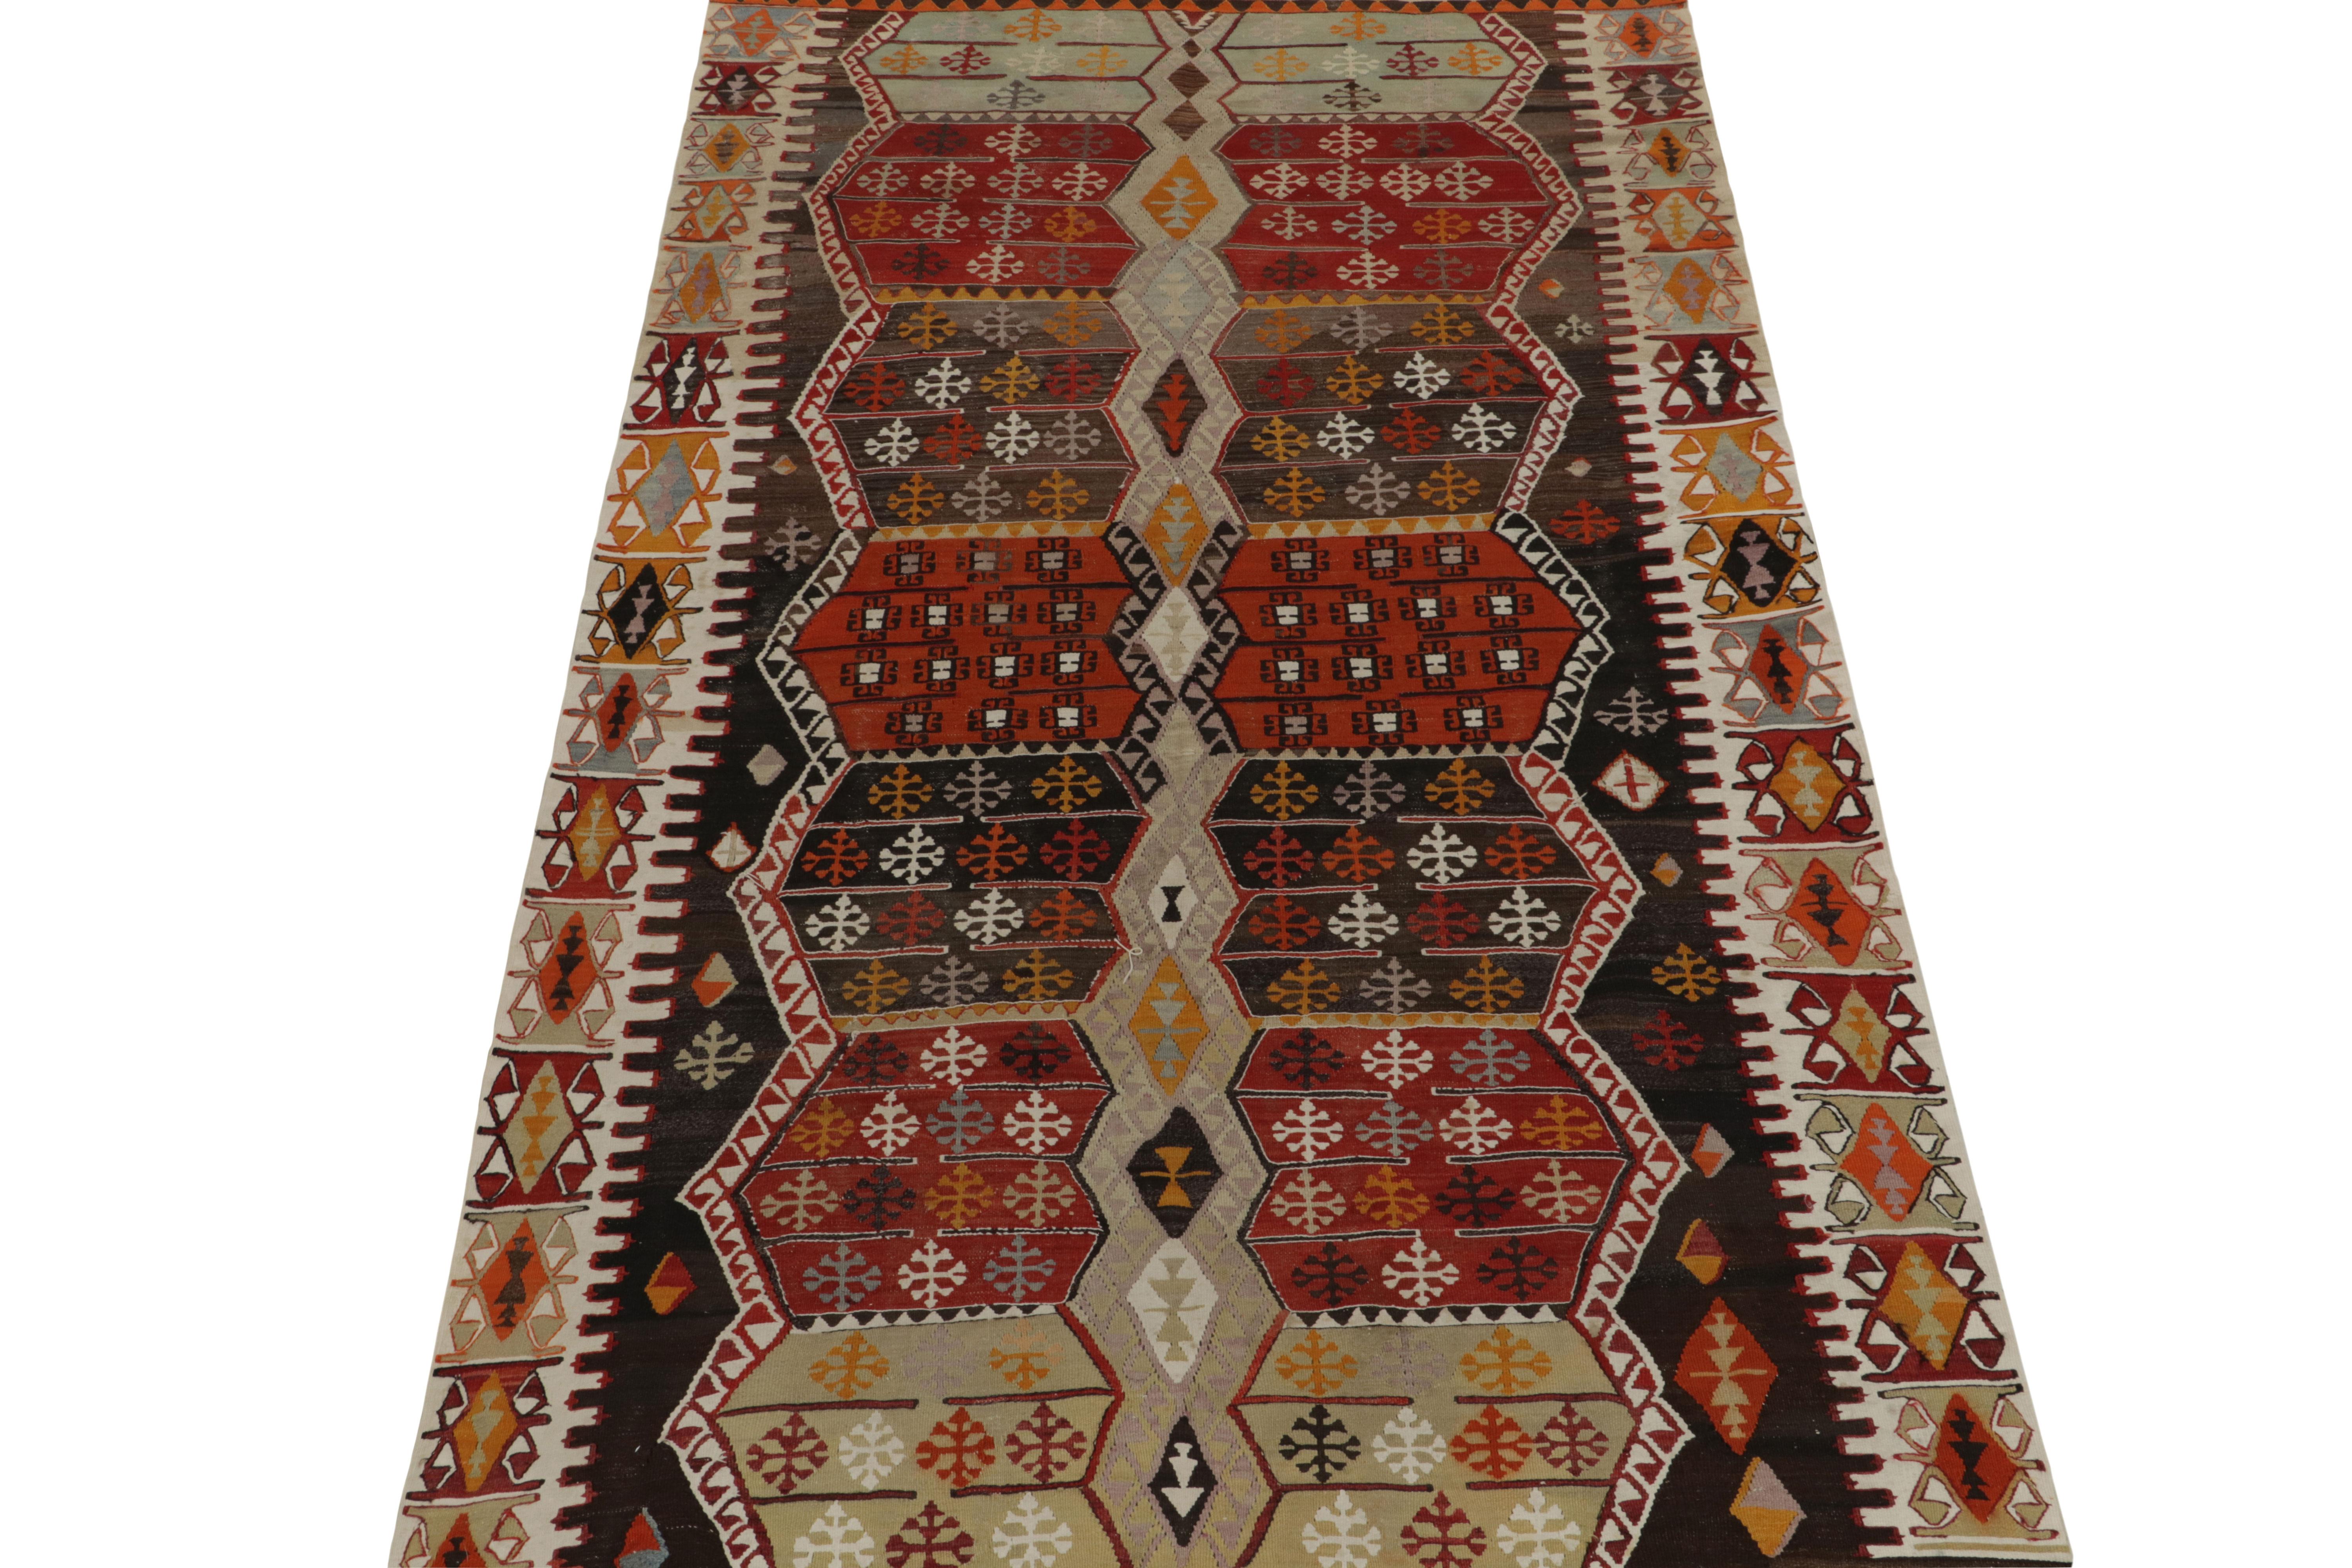 Tribal 1930s Antique Turkish Kilim in Red and Brown with Gold and Grey by Rug & Kilim For Sale